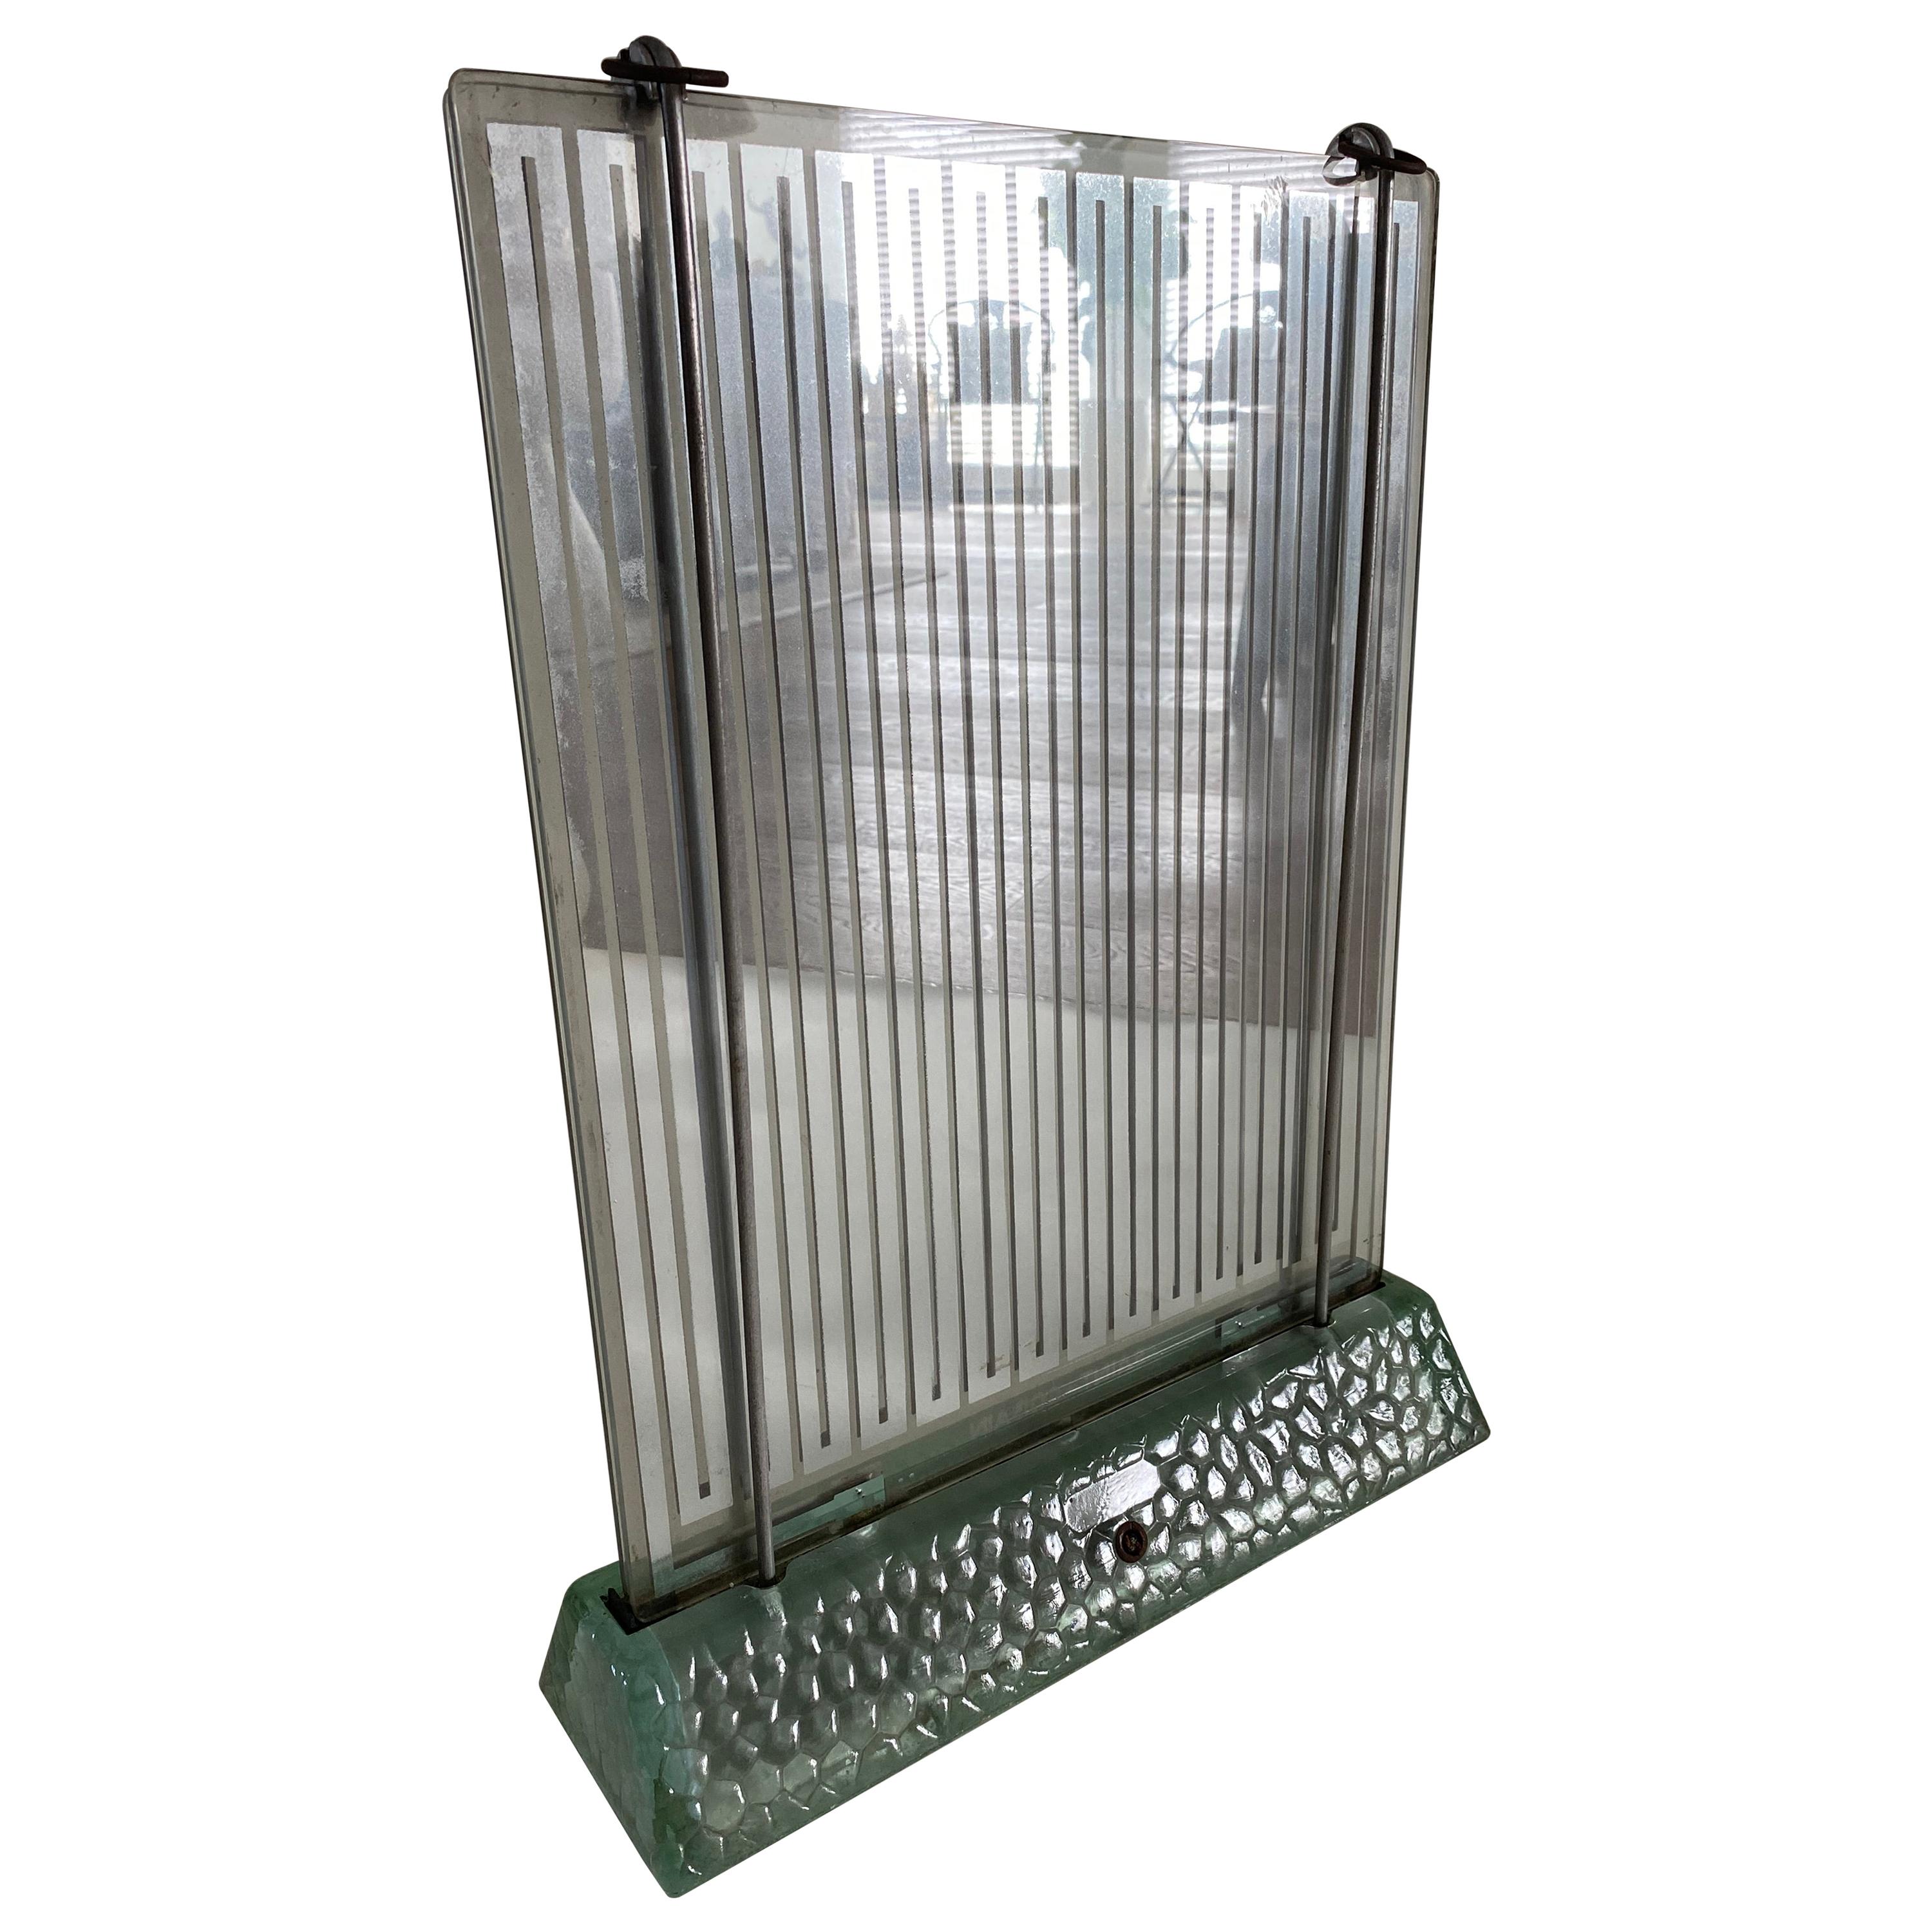 A Tempered, Moulded and Mirrored Glass Radiator by Saint-Goban, 1937 For Sale